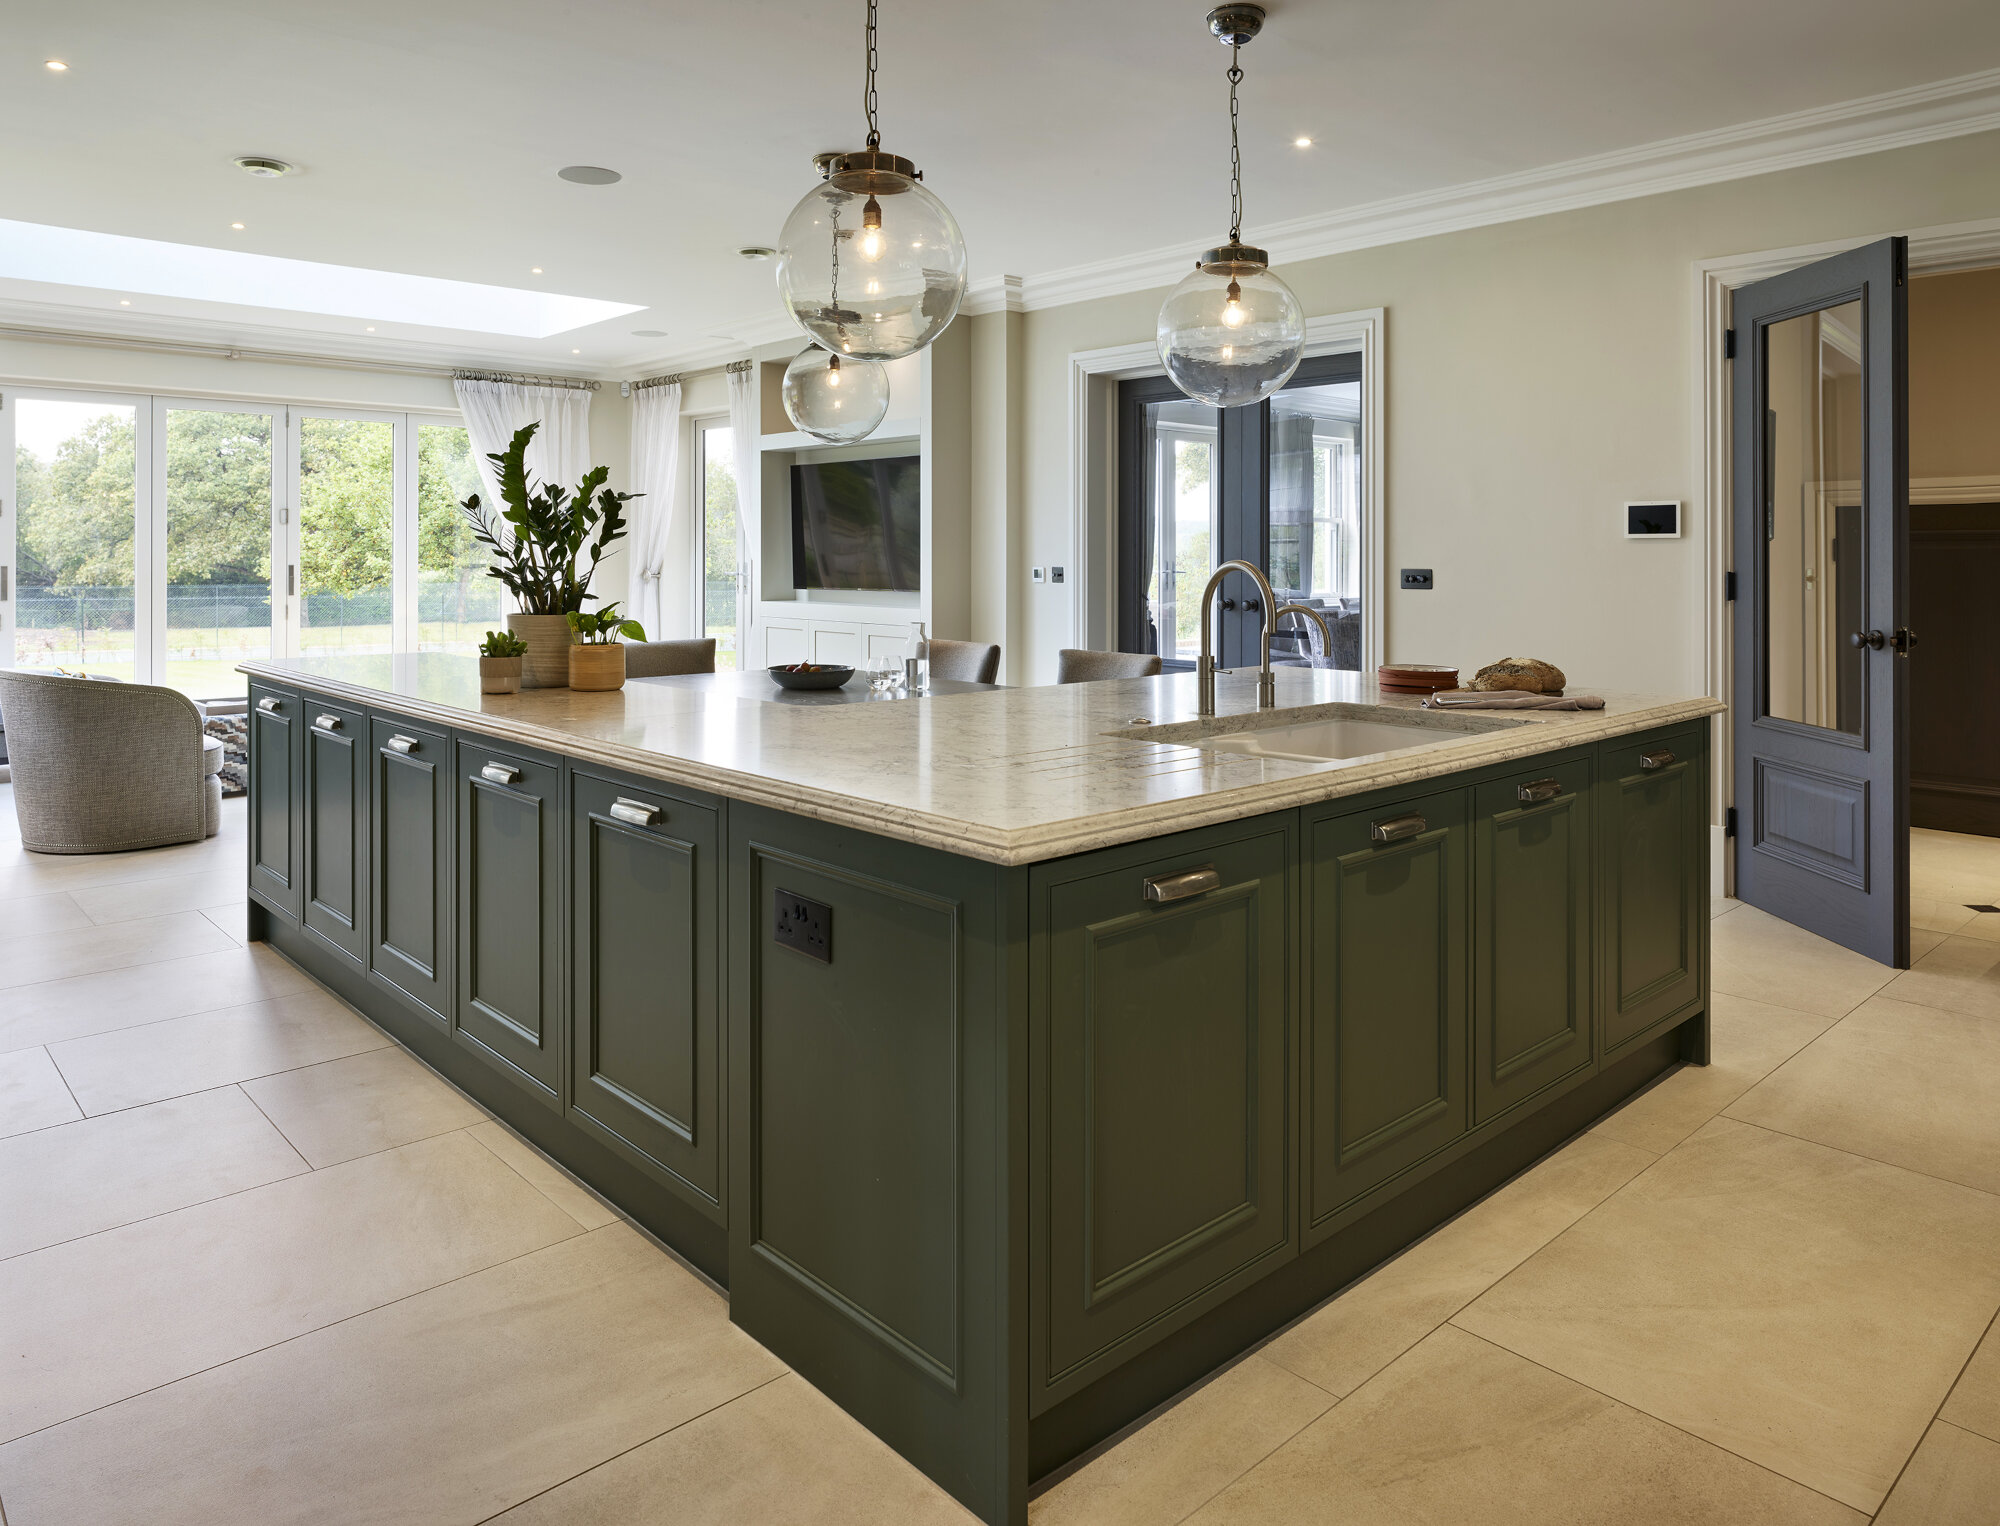 High End traditional Kitchens In Clay Cross